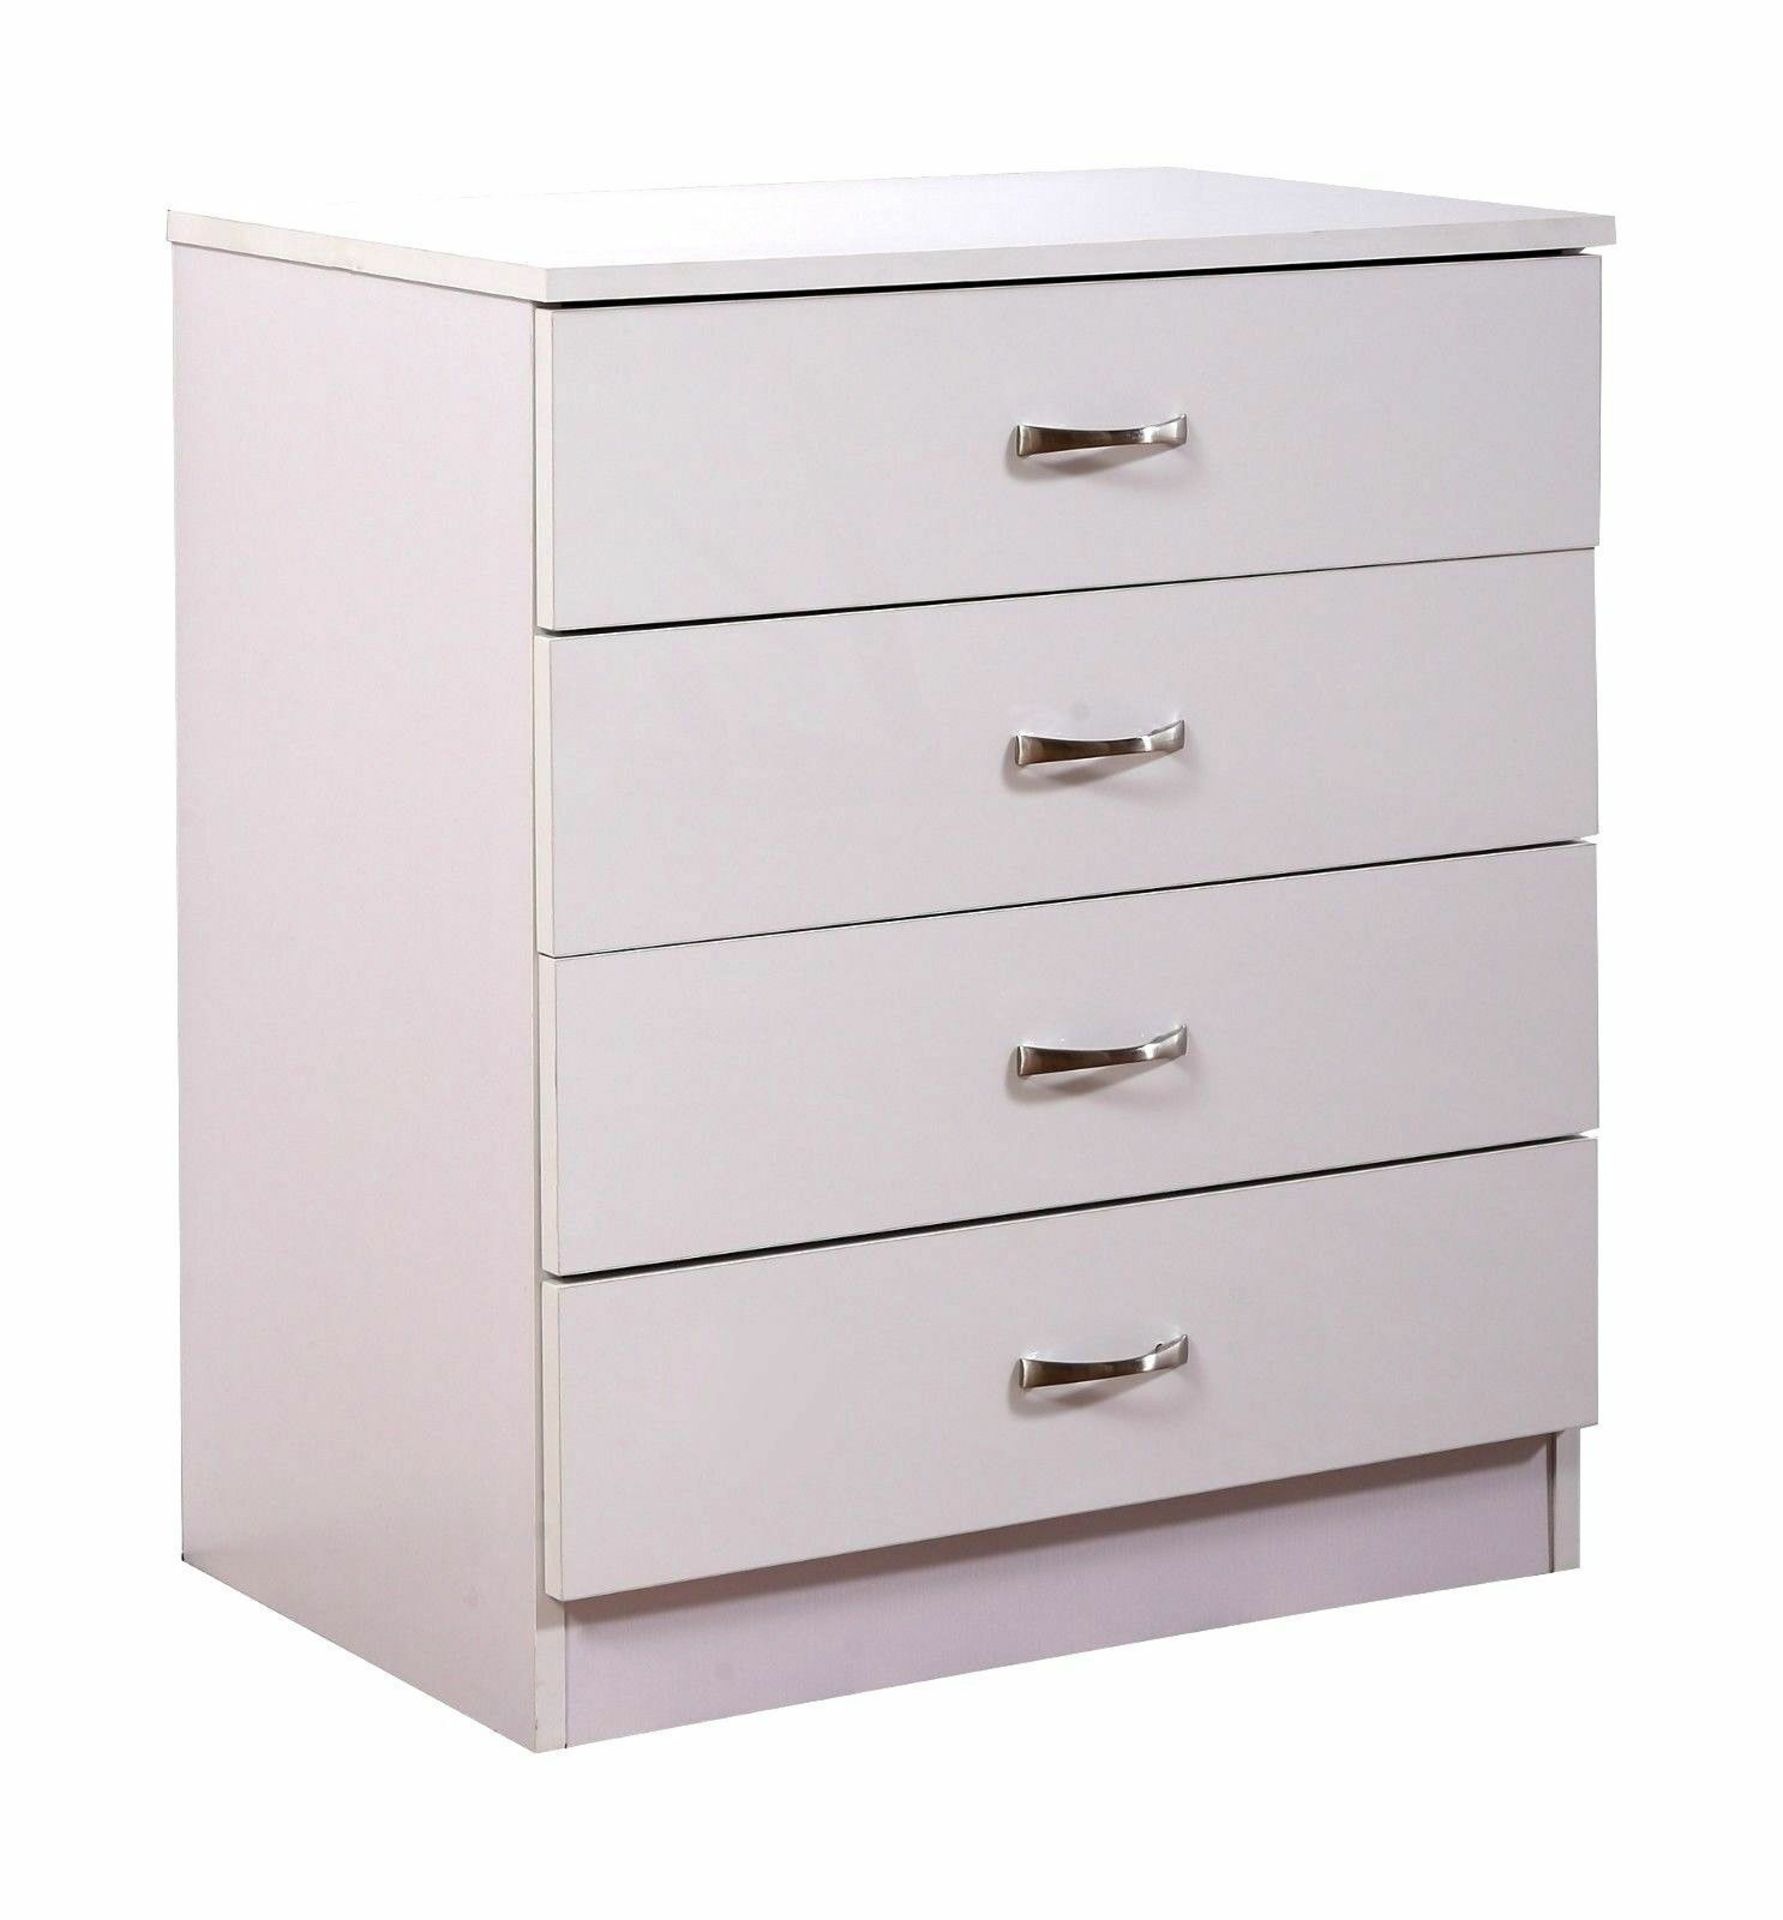 WHITE 4 DRAWER CHEST WITH HIGH GLOSS FRONTS